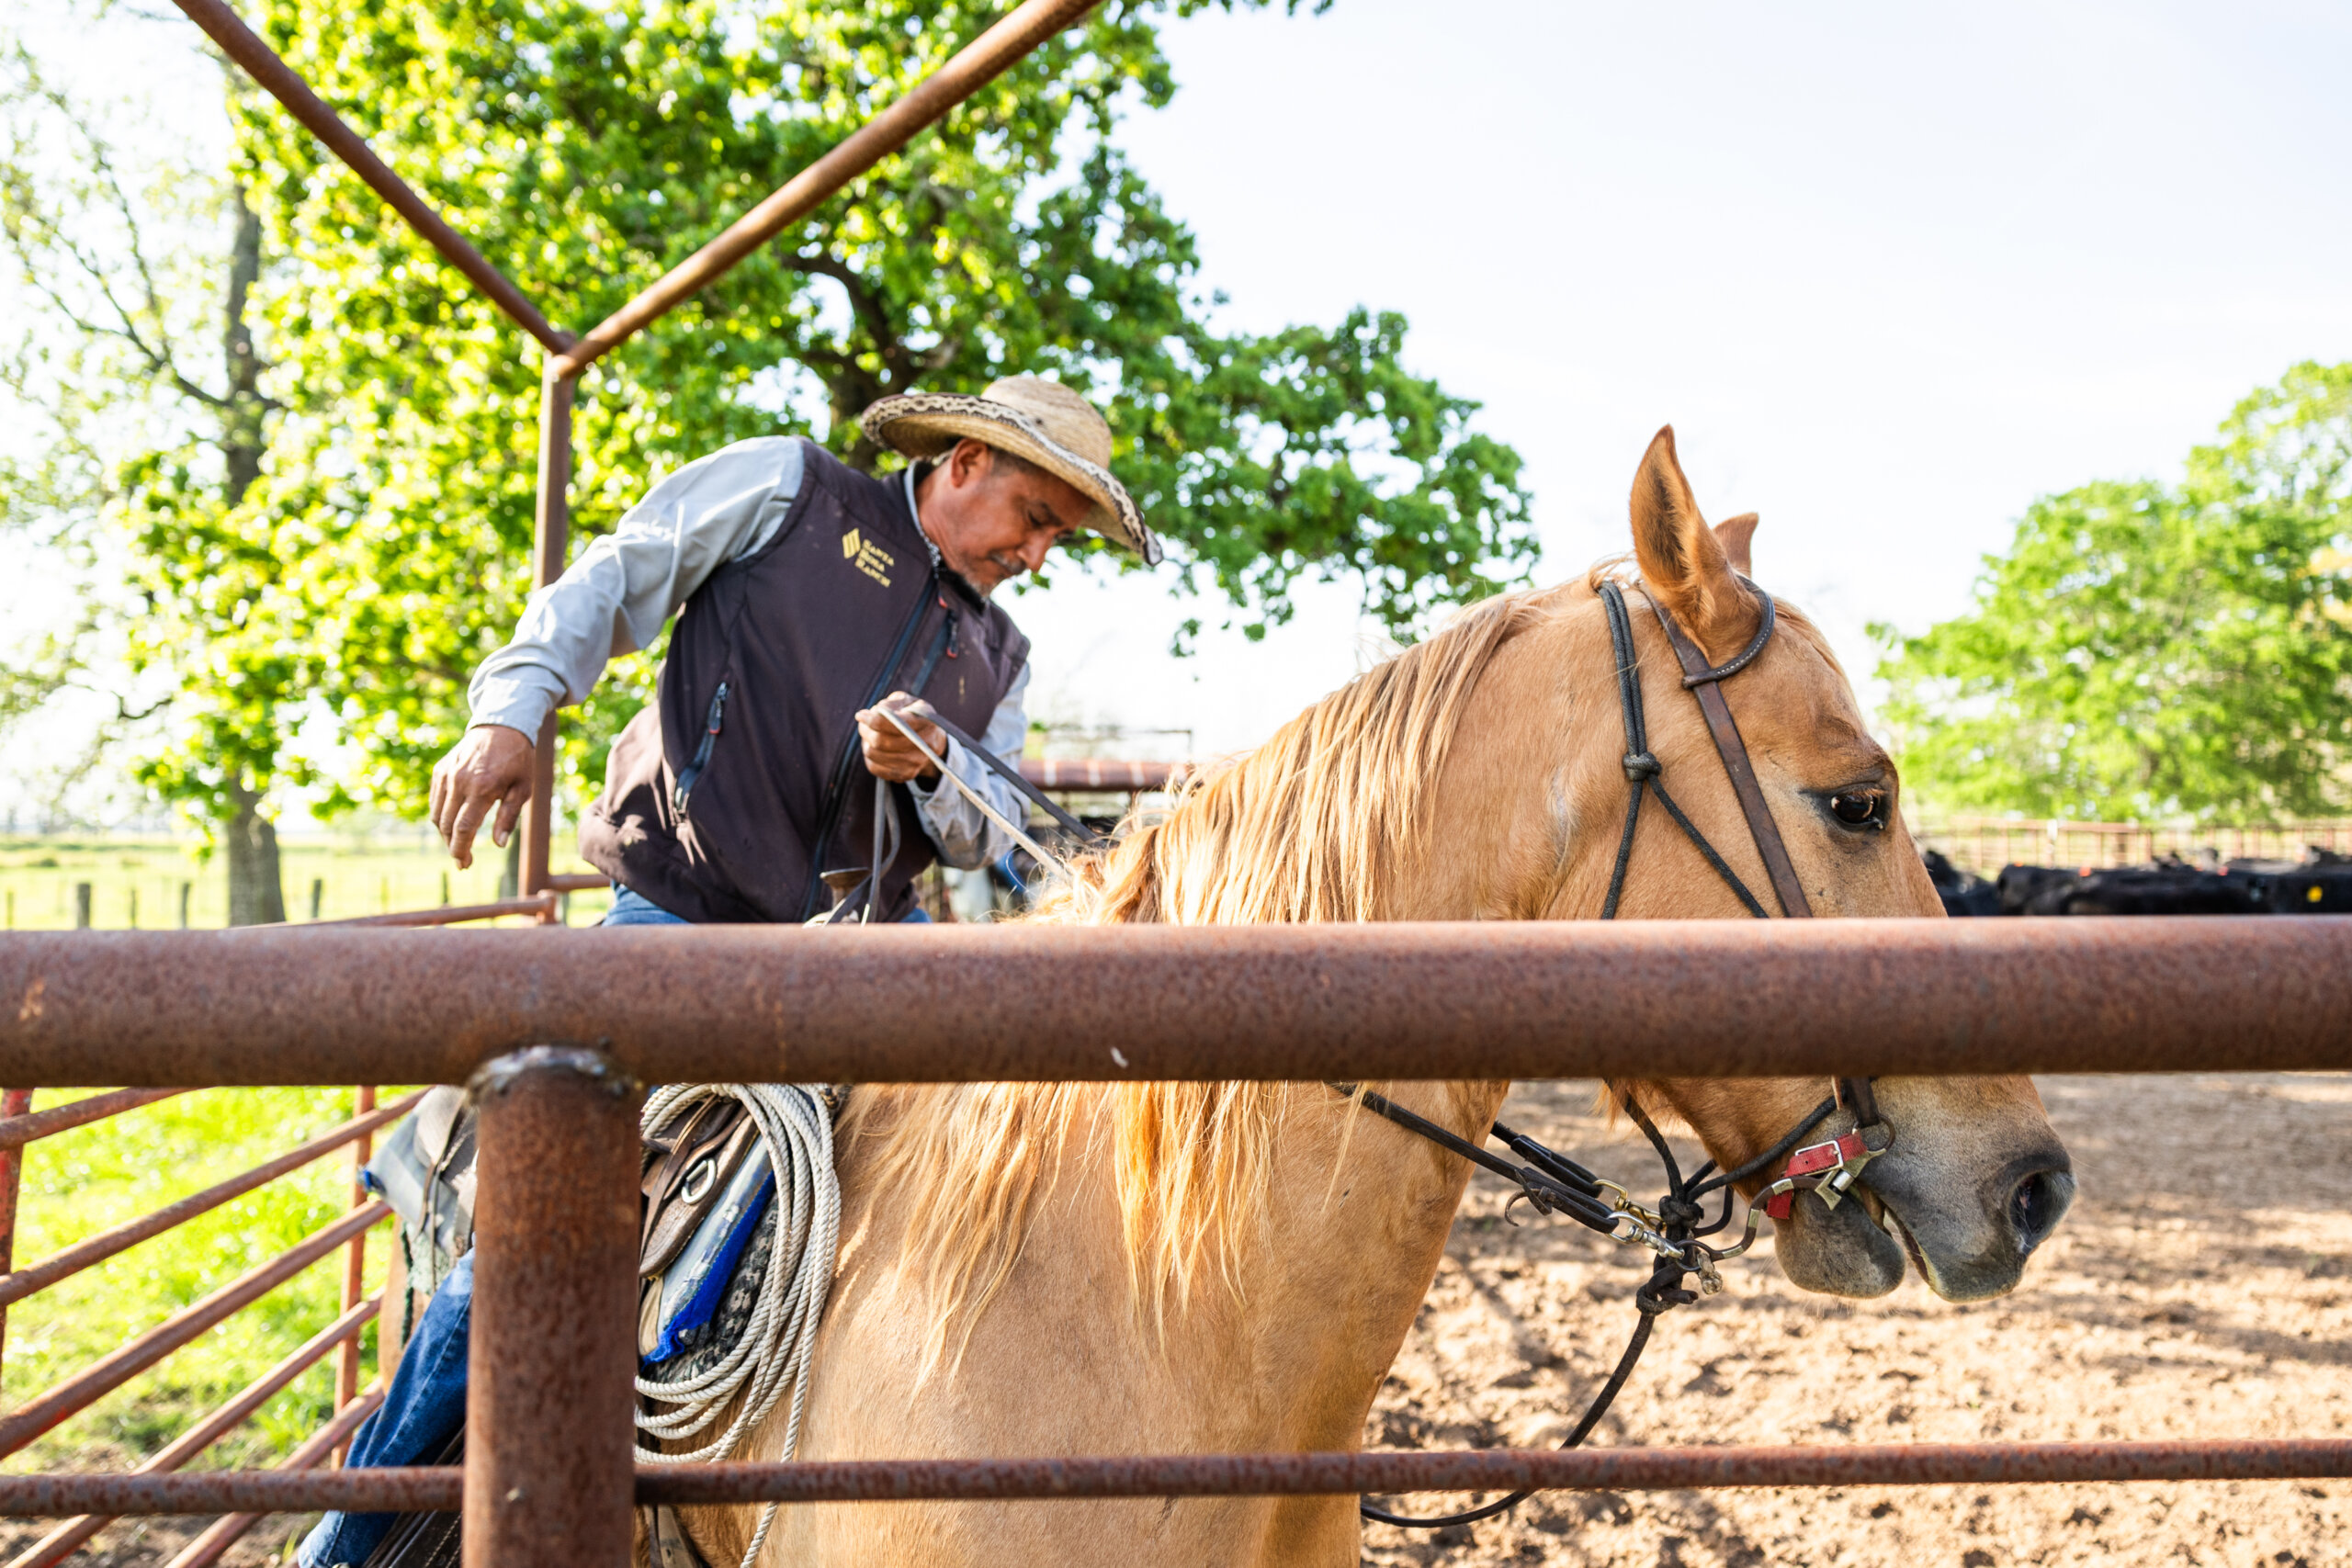 A rider on horseback helping to wrangle cattle